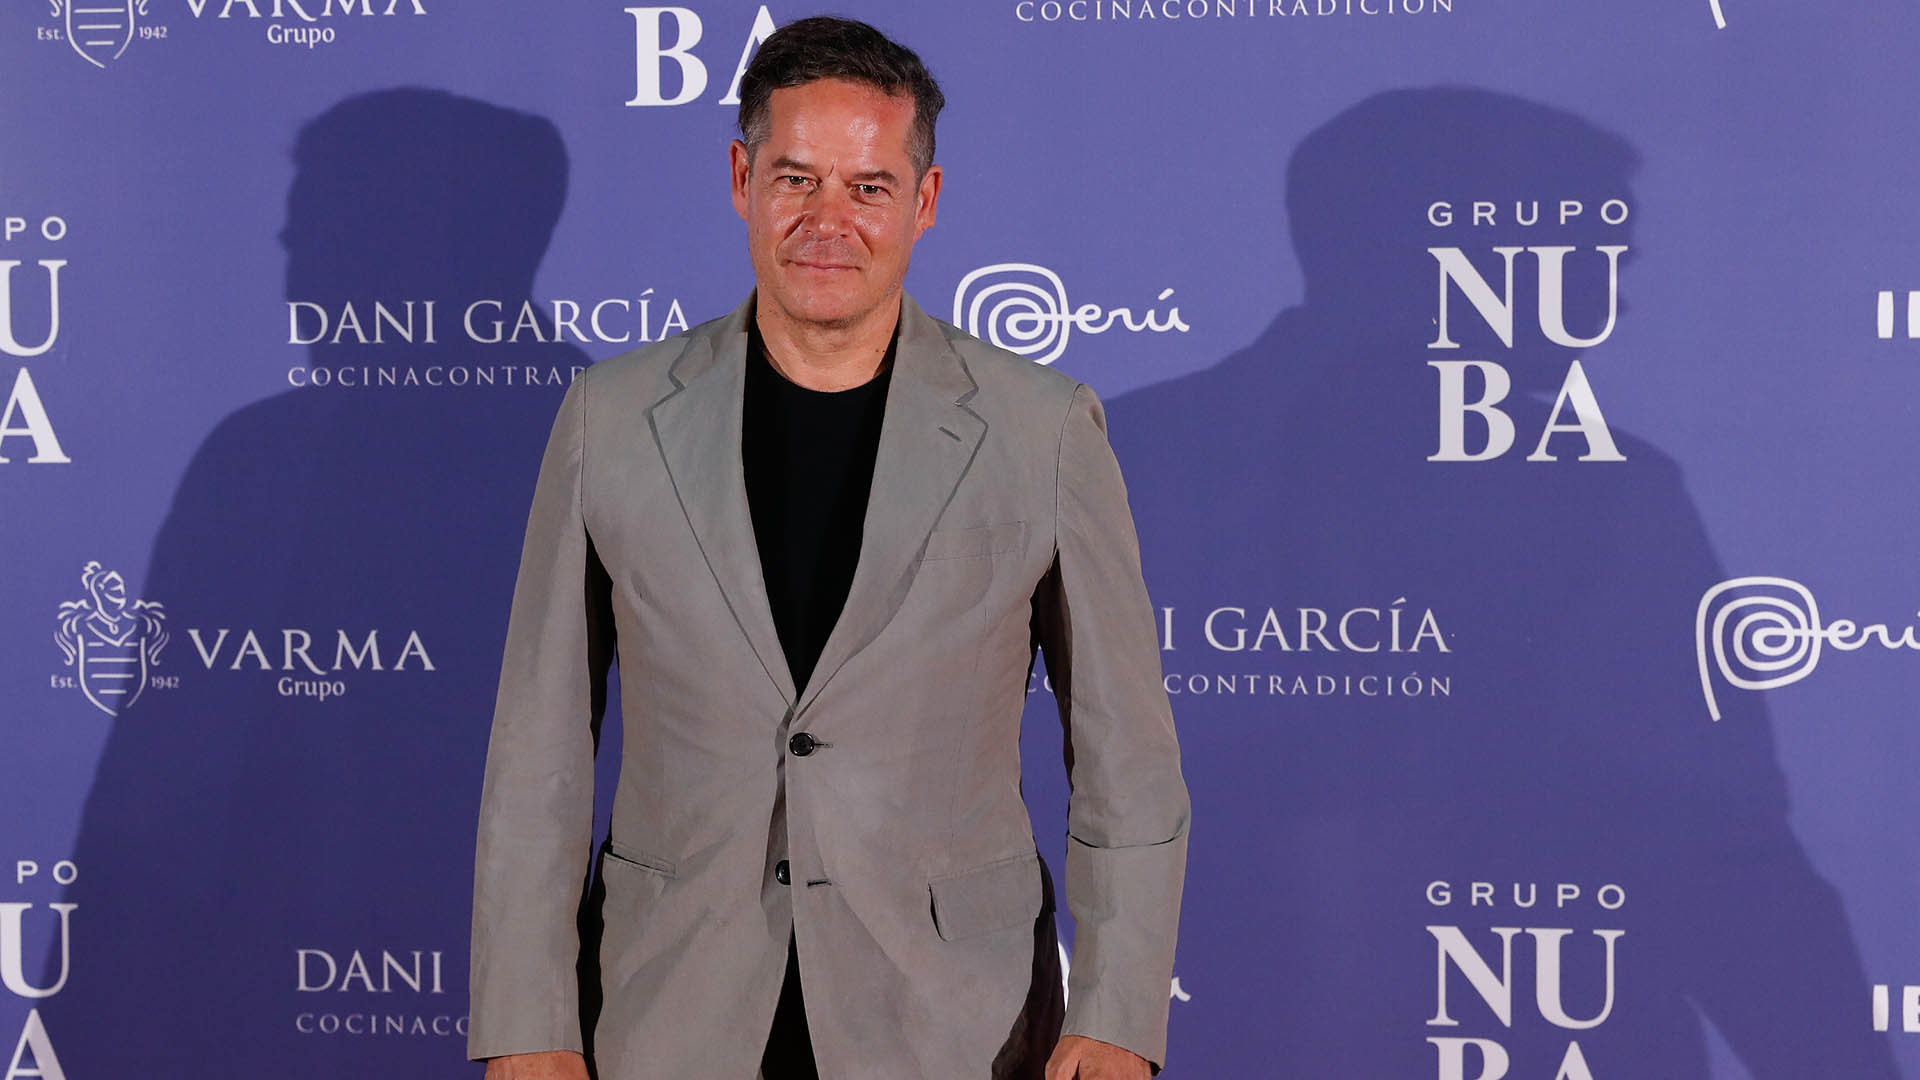 Actor Jorge Sanz attends Viajes Nuba 25th anniversary party, in Madrid, on Tuesday 17, September 2019